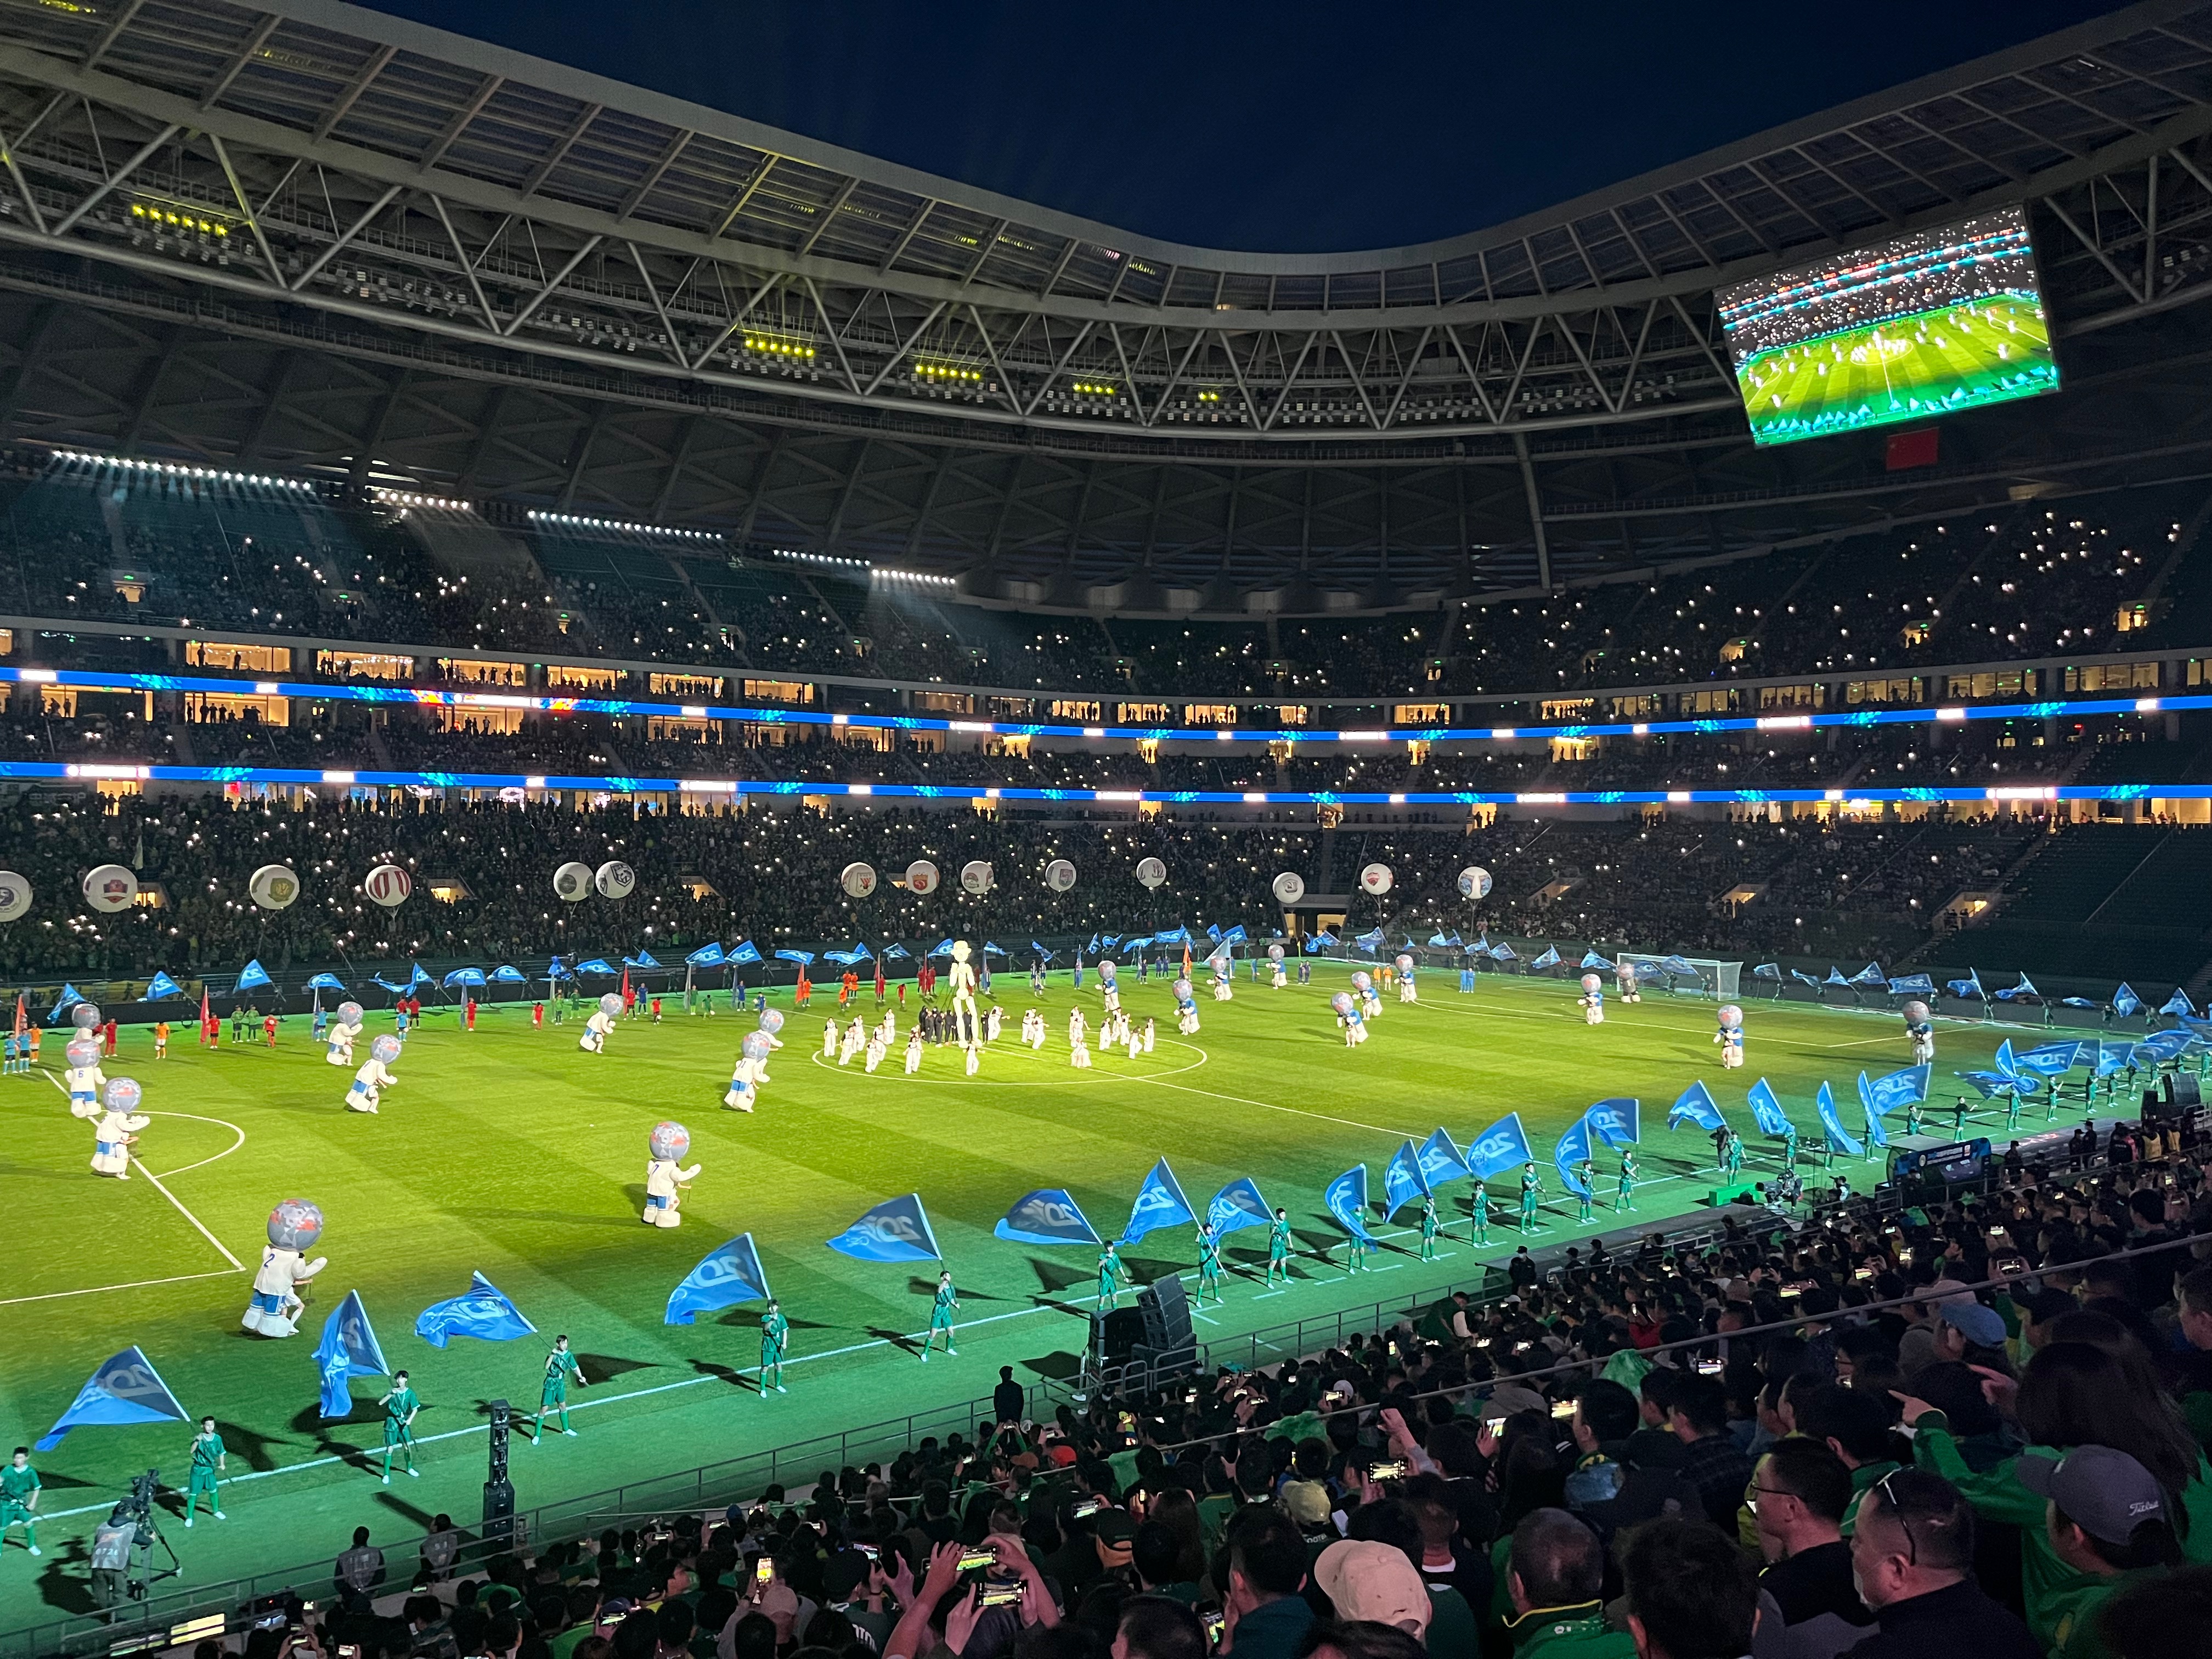 Beijing Guoan fans are treated to a grand opening ceremony of the new Chinese Super League season at the Workers' Stadium in Beijing, China, April 15, 2023. /CGTN